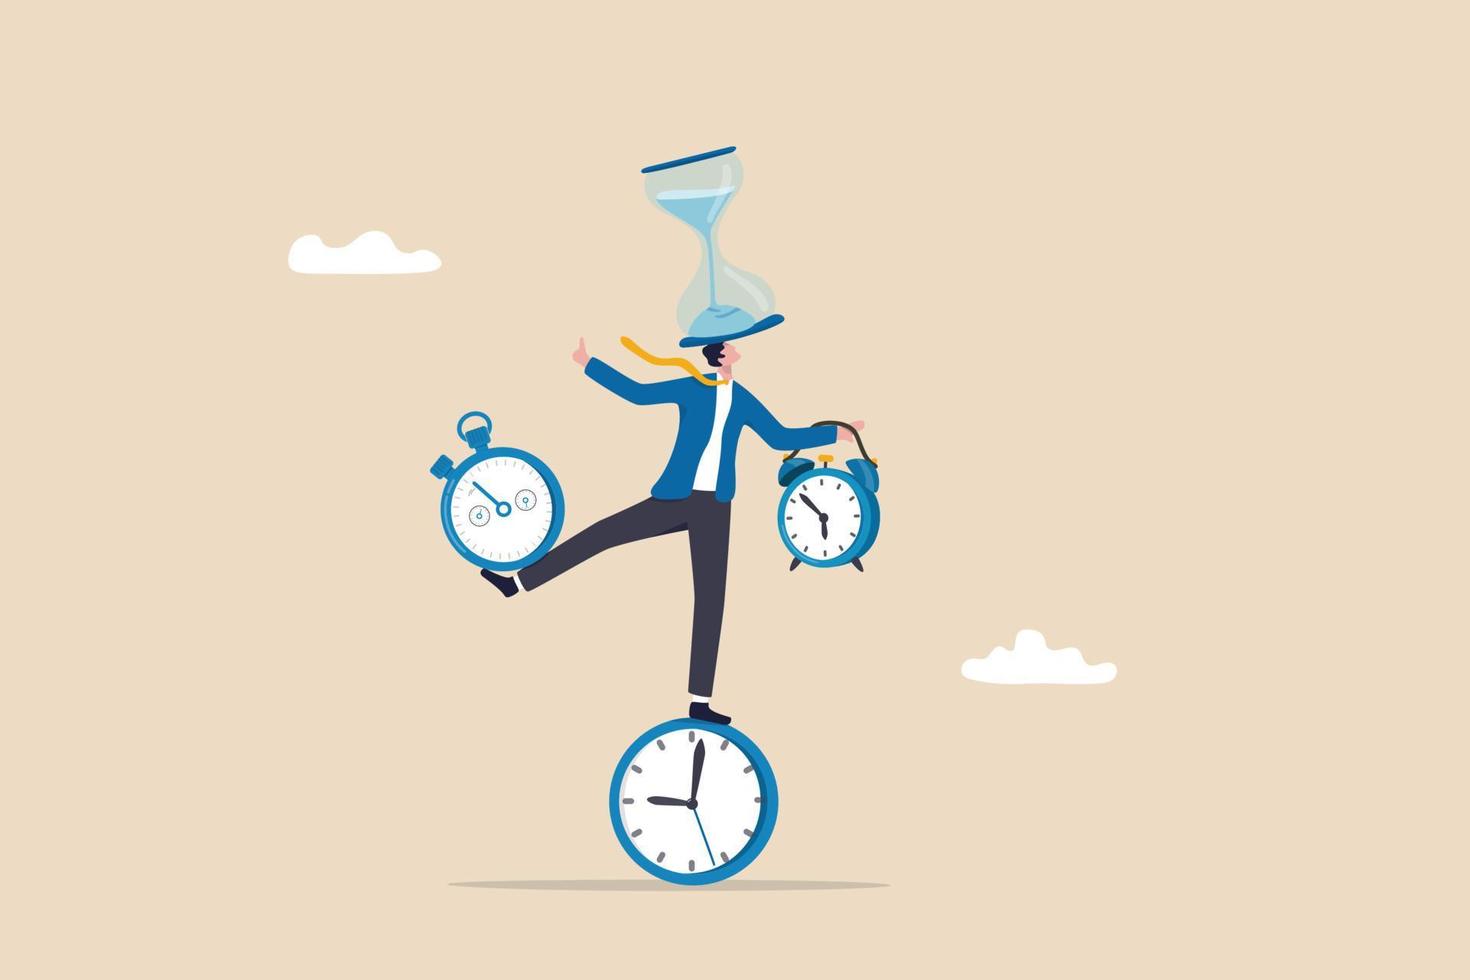 Time management or productivity addiction, work life balance or control work project time and schedule concept, smart businessman balancing all time pieces, sandglass, alarm clock, countdown timer. vector